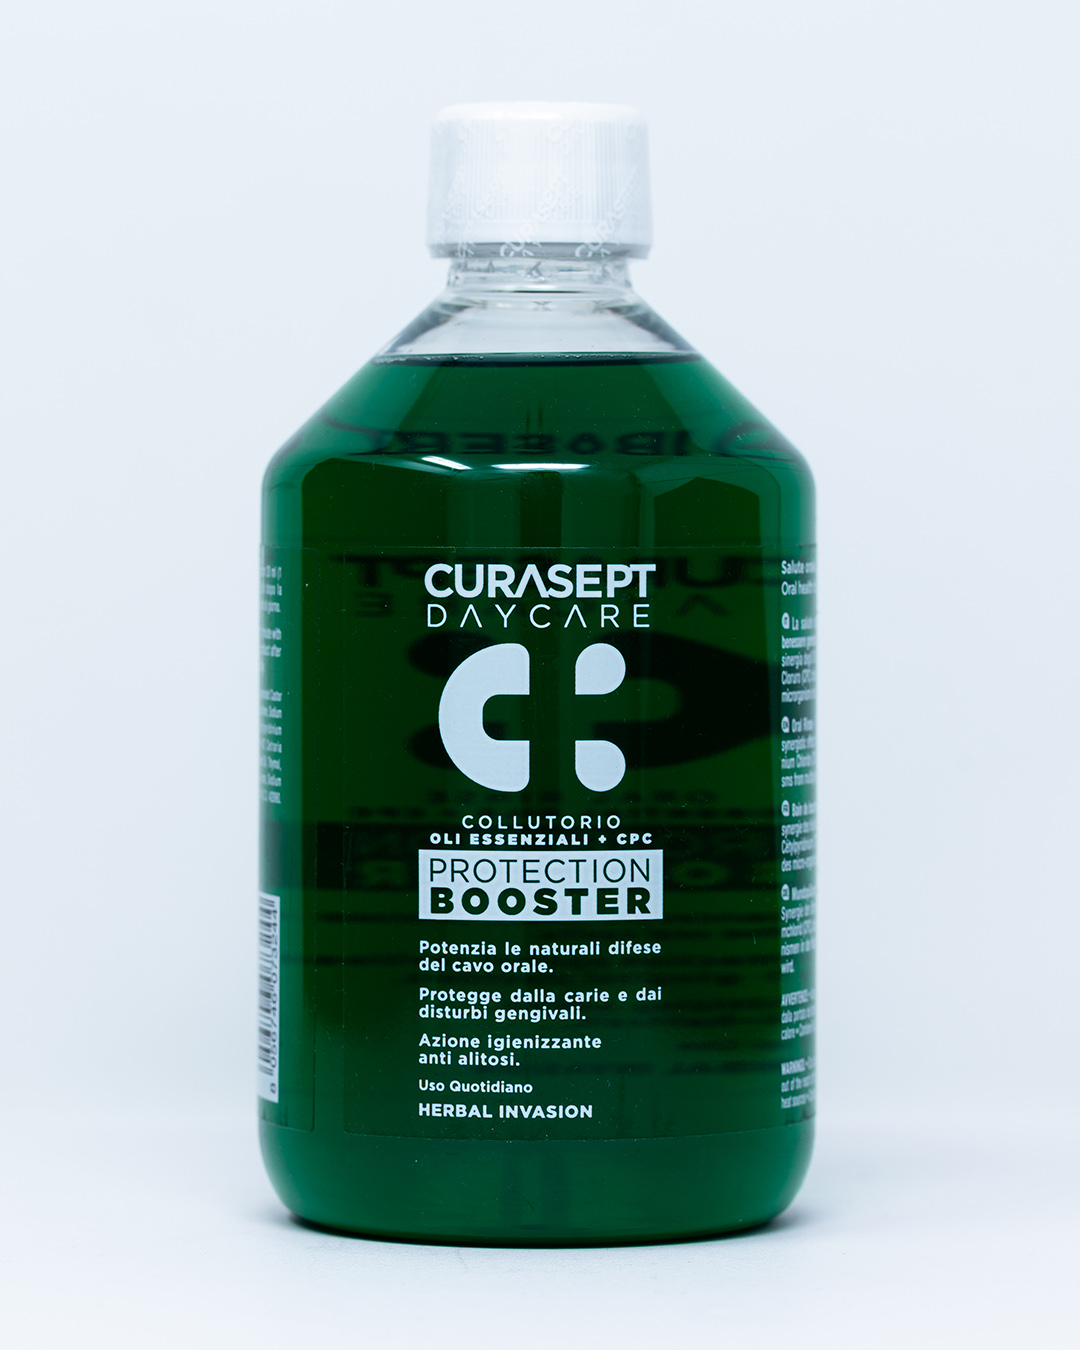 Curasept Collutorio Daycare Protection Booster Herbal Invasion - 500 ml